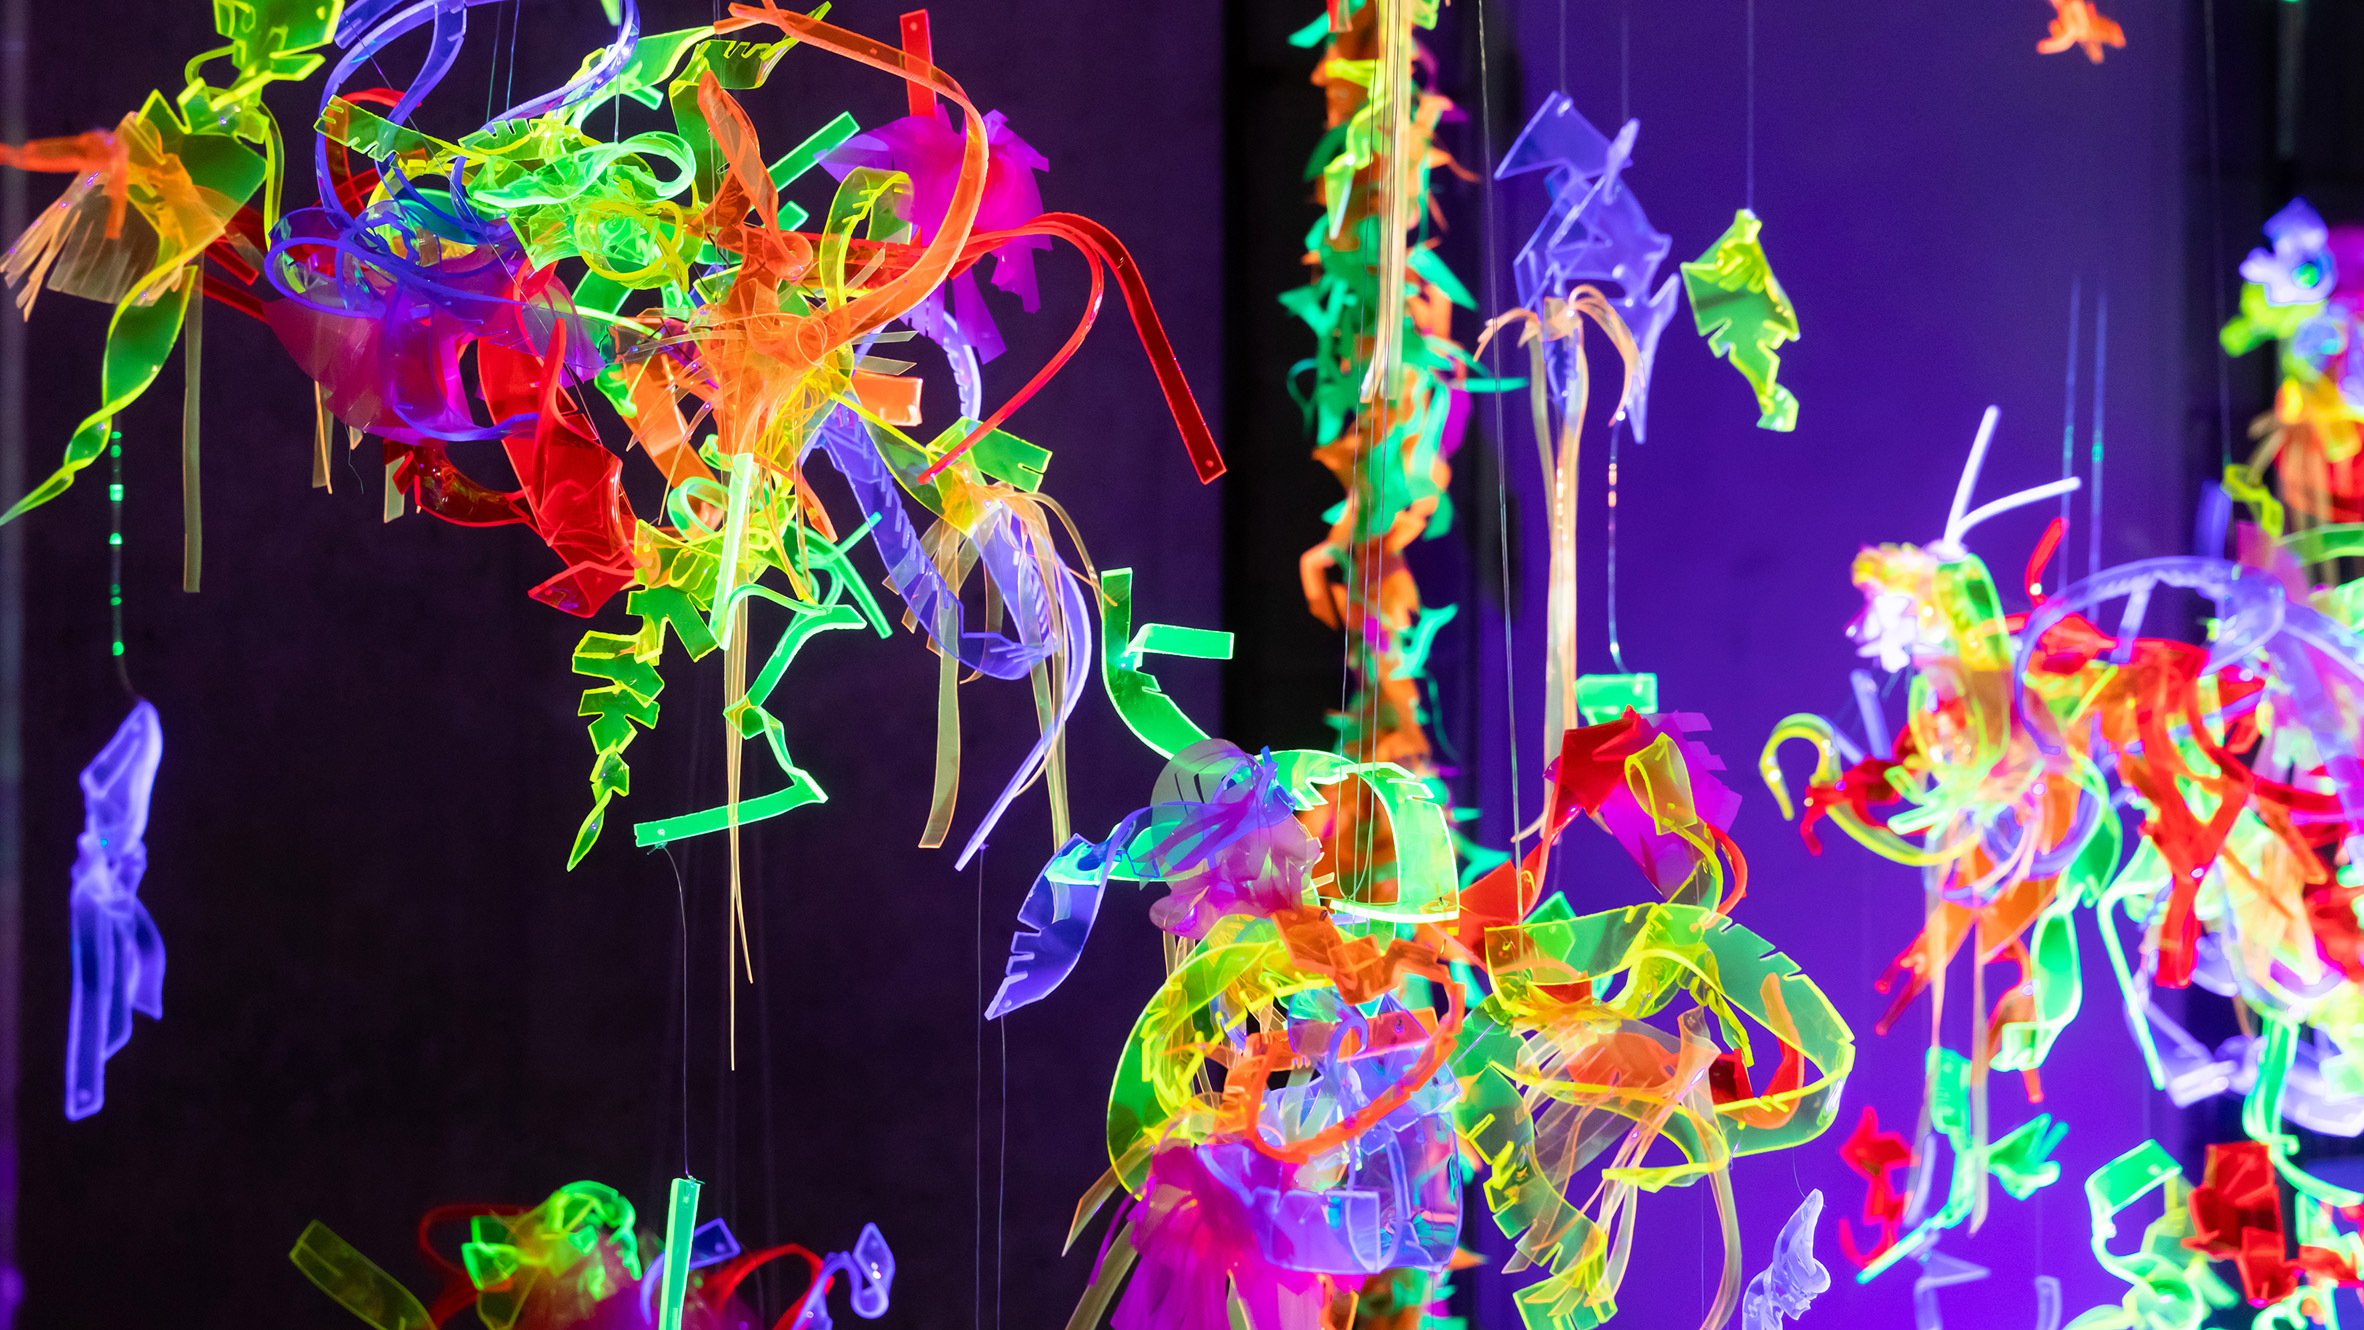 Brightly coloured fluorescent shapes hanging in blacklight-lit space